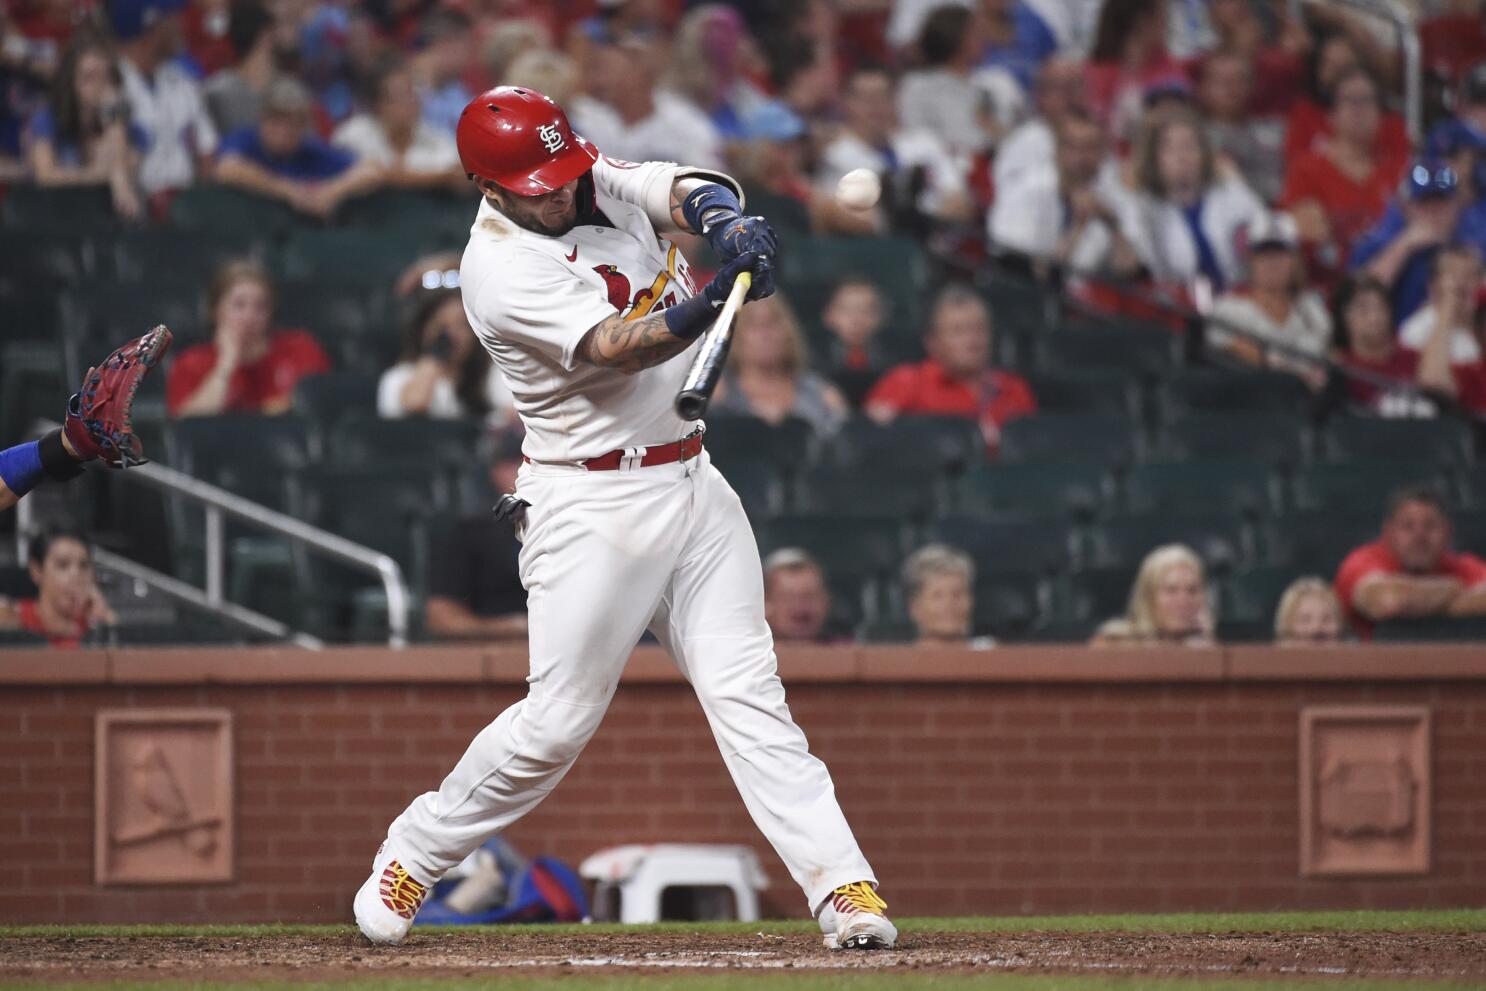 St. Louis Cardinals star Yadier Molina has one of most popular MLB